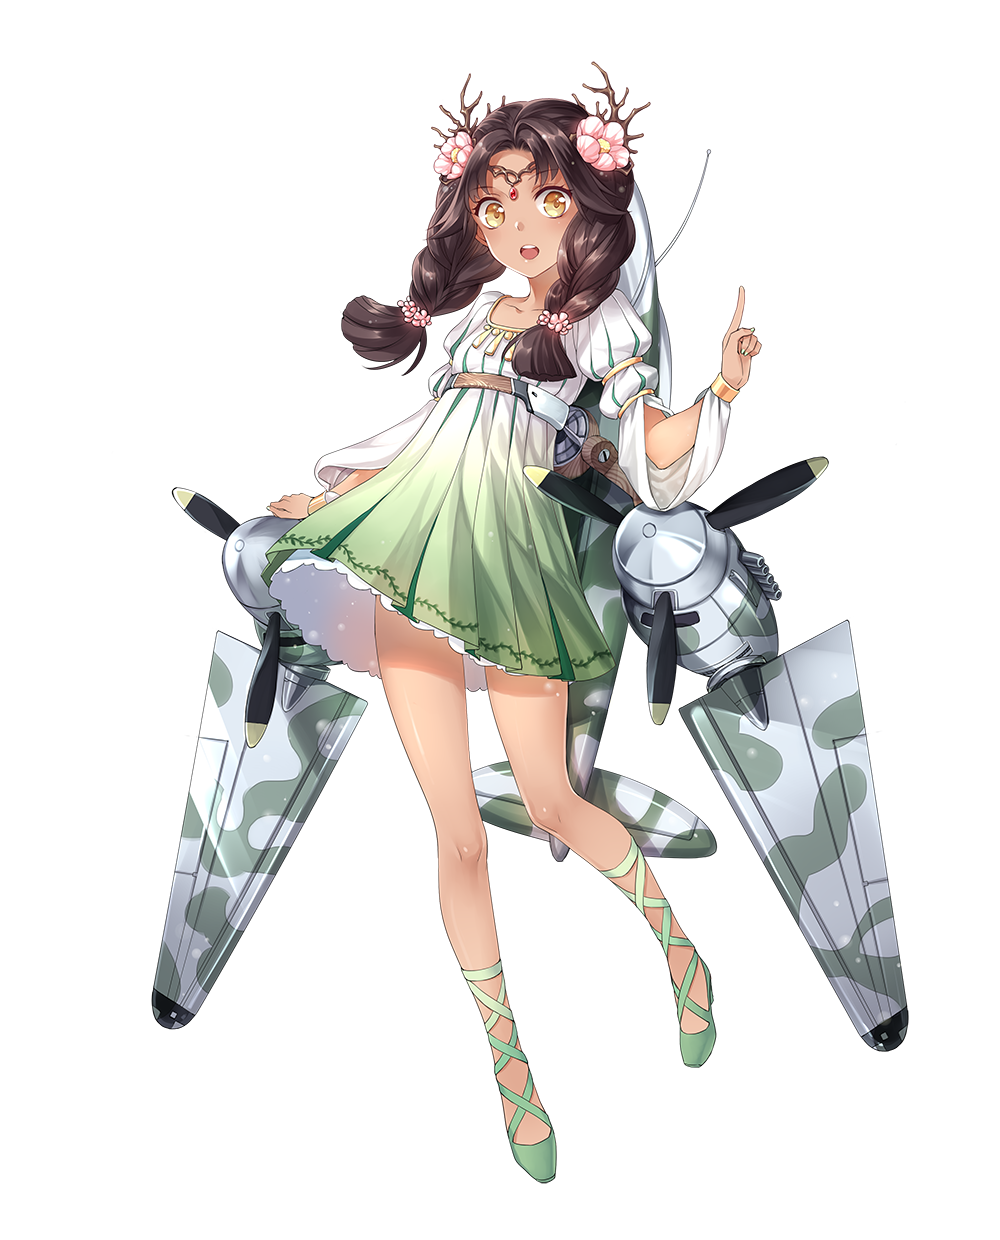 DH-98侧边栏.png